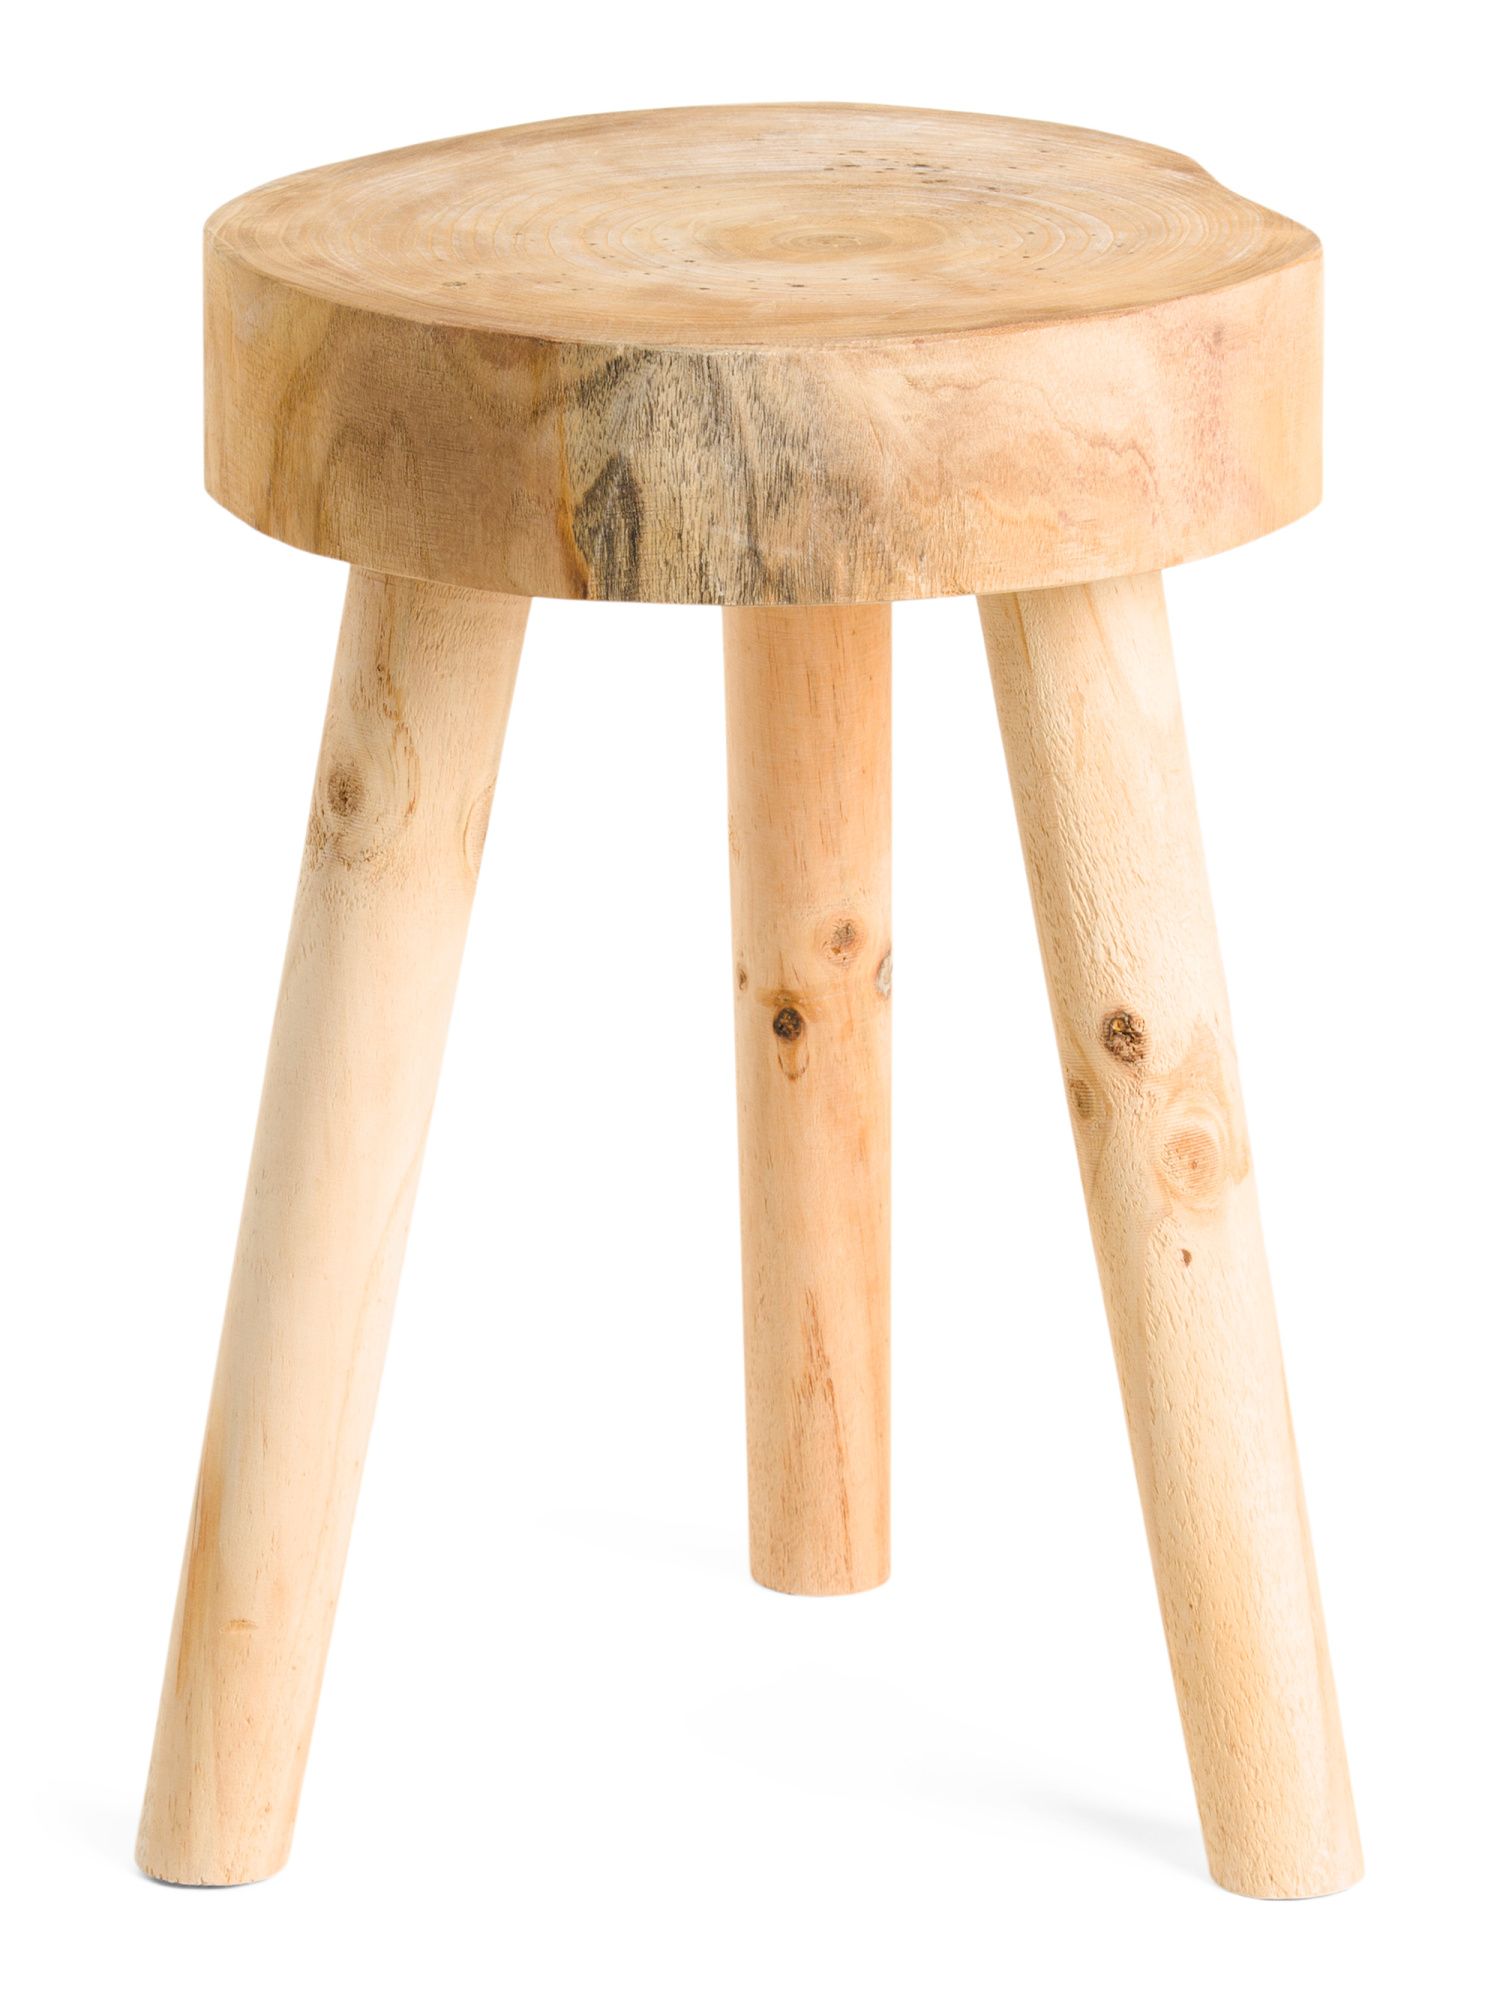 23in Wooden Stool | Chairs & Seating | Marshalls | Marshalls